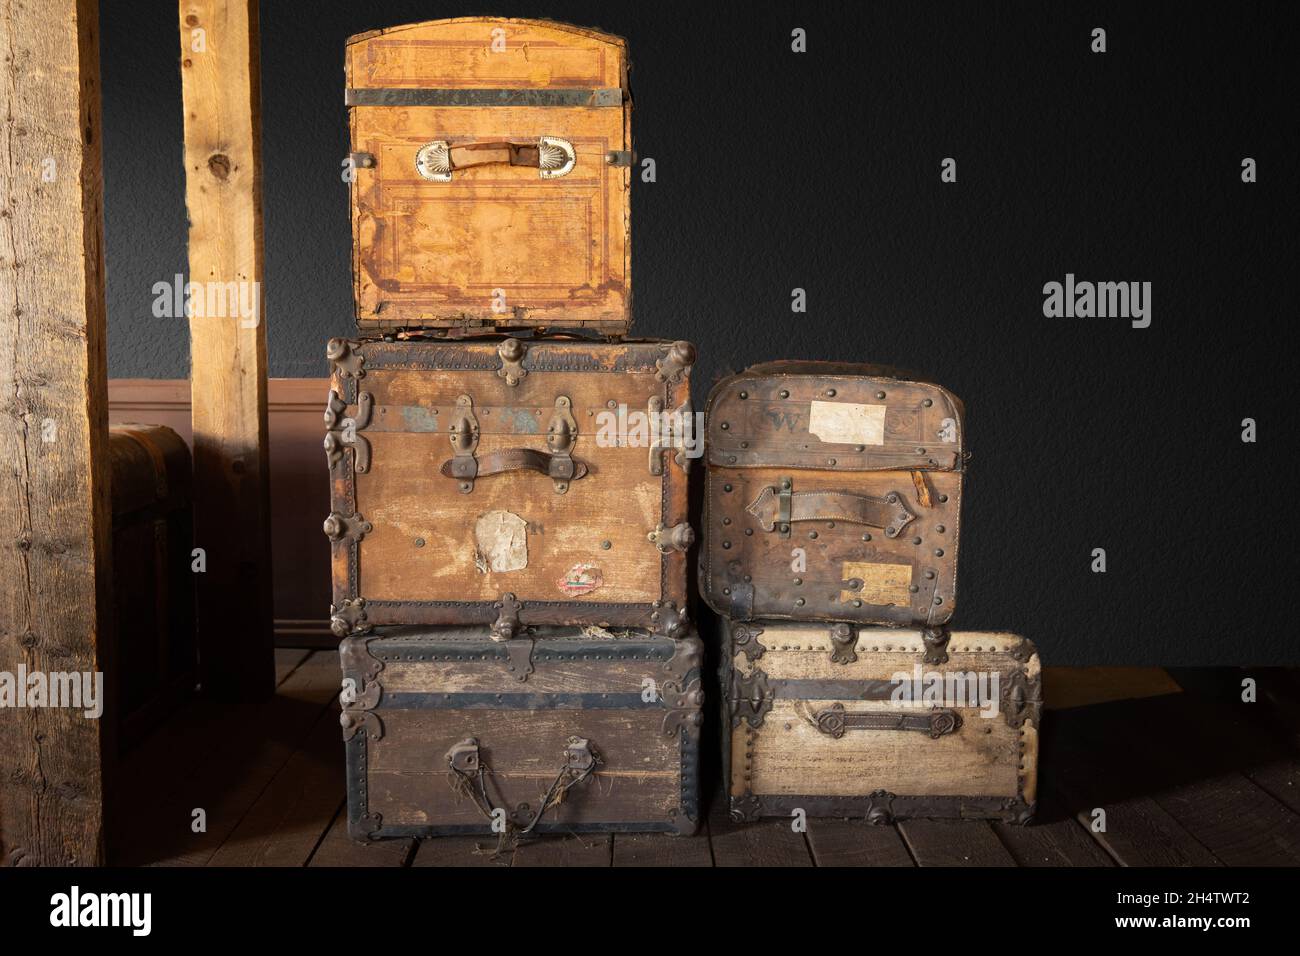 Steamer Trunk. An antique Steamer Trunk. Isolated on white. Room for text. Steamer  Trunks have been used as luggage for years to protect and move clot Stock  Photo - Alamy